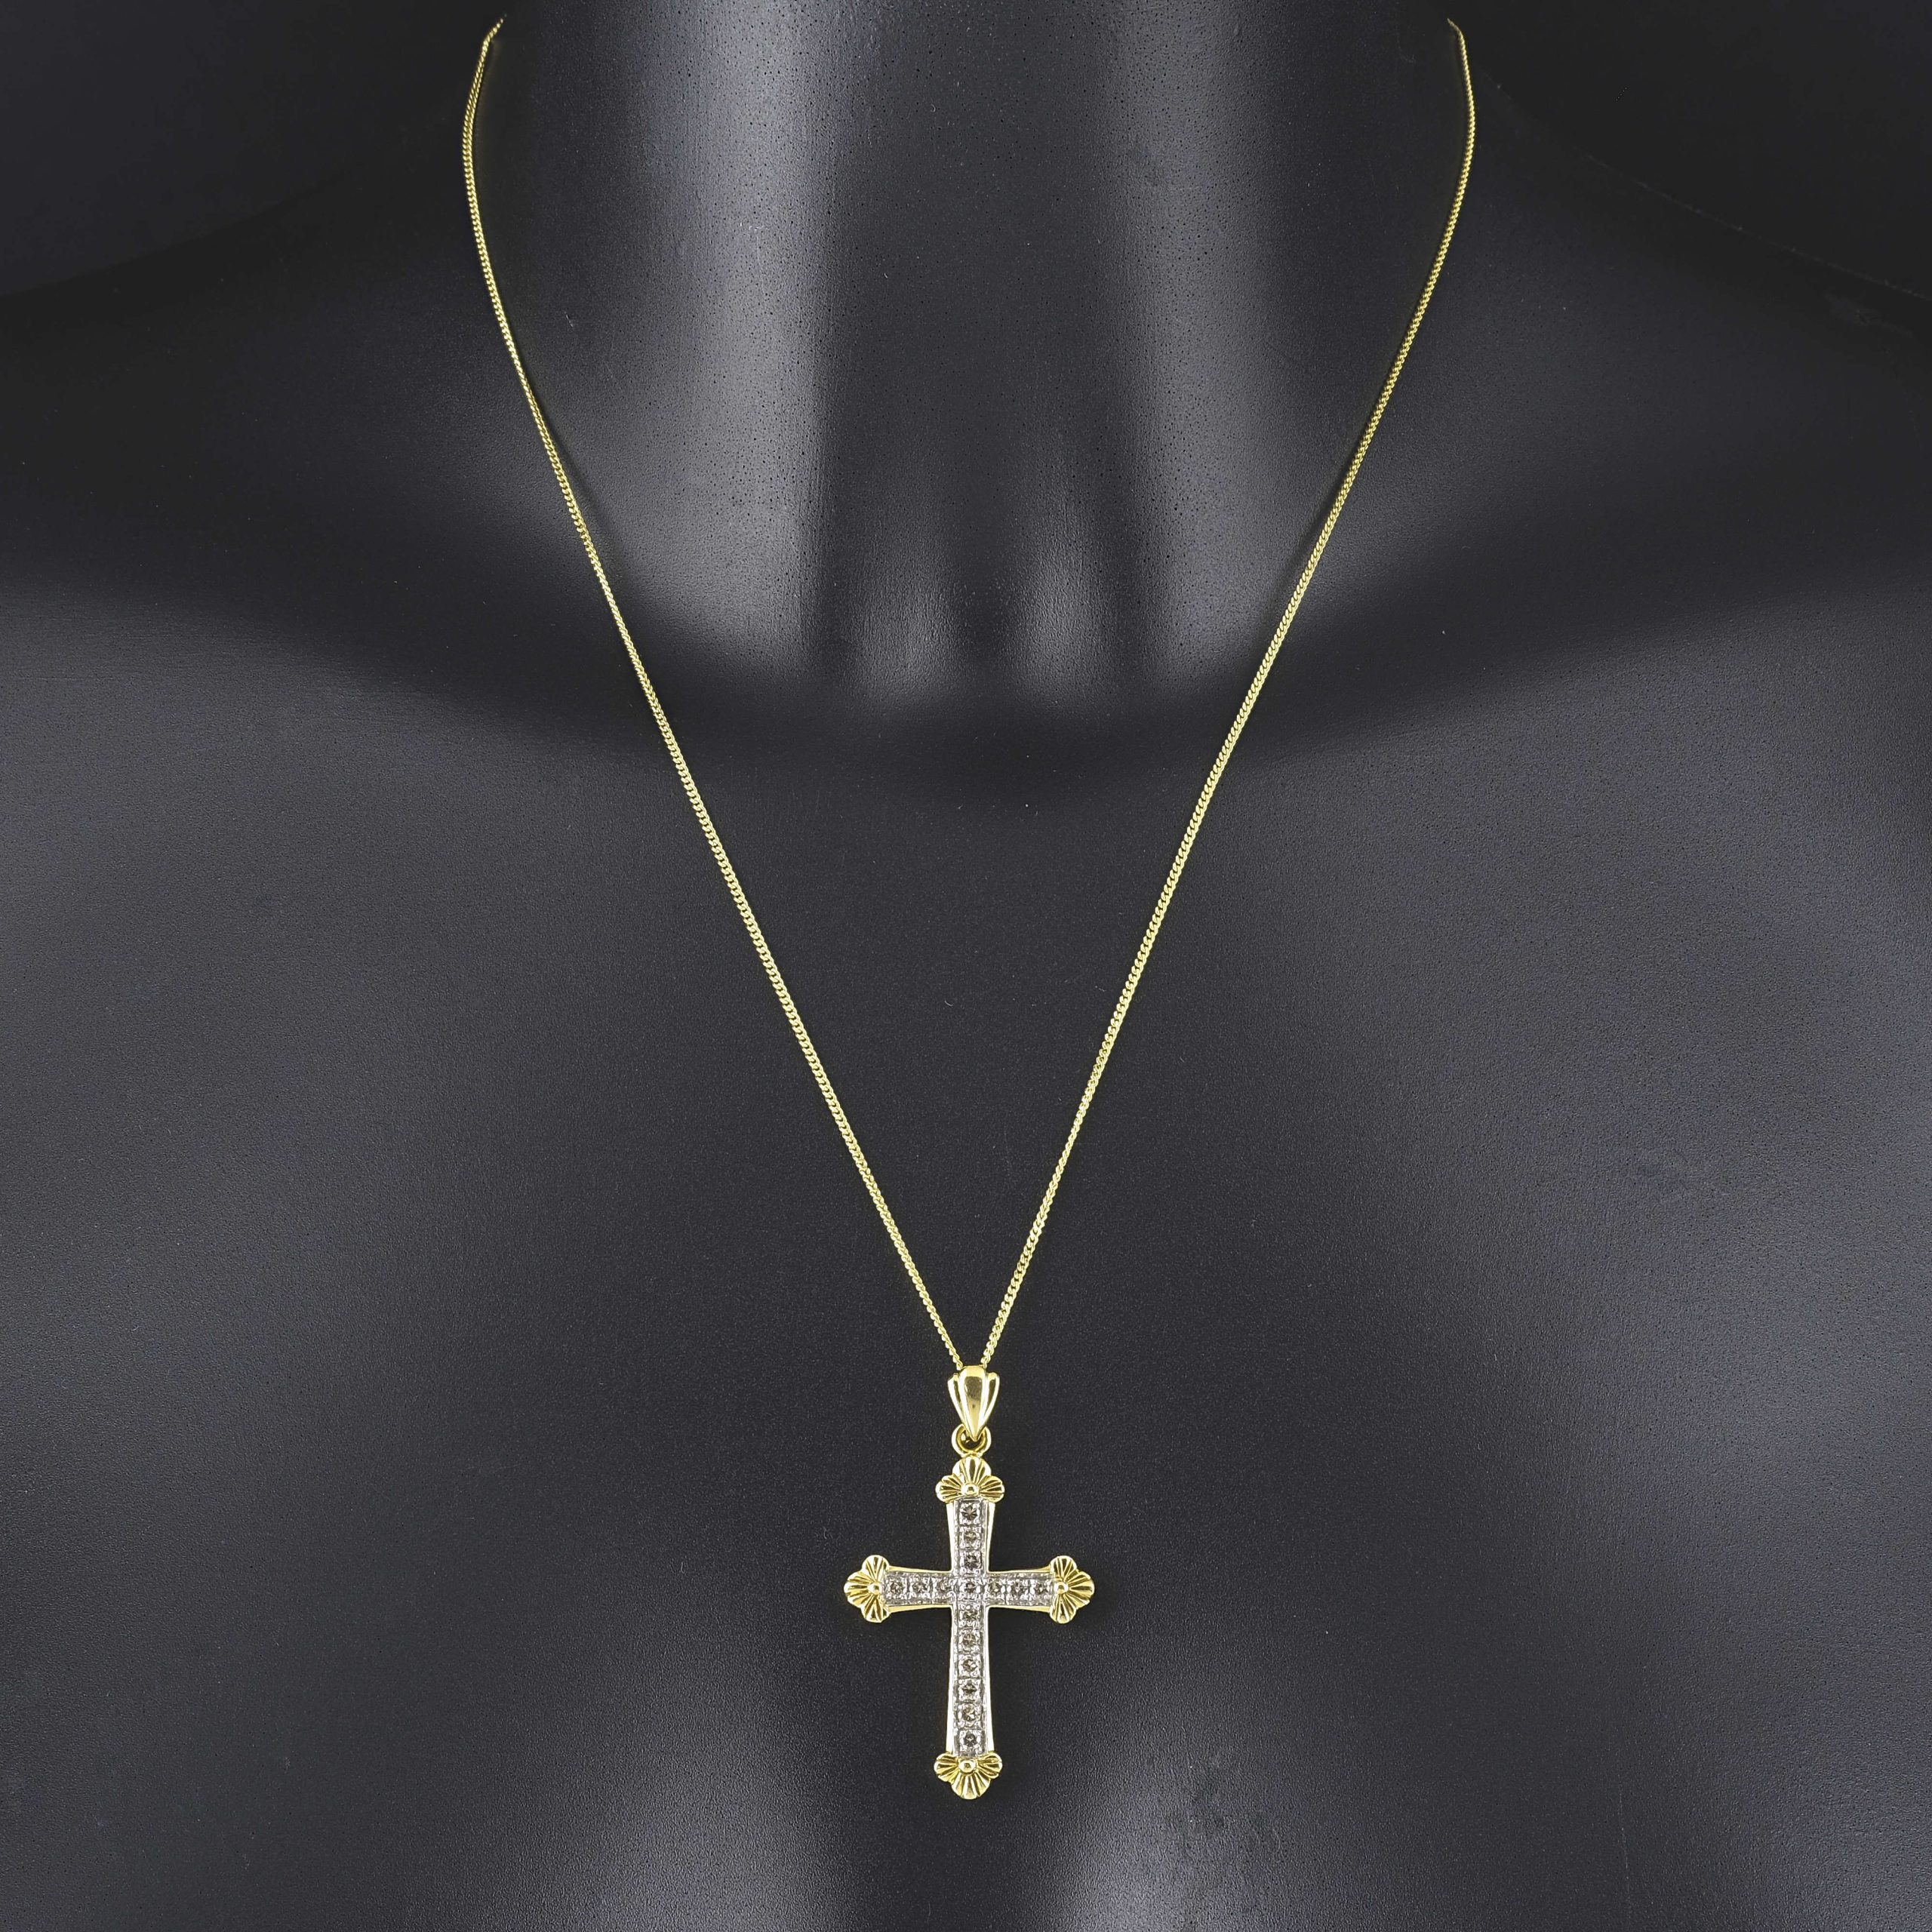 18ct Gold Over Sterling Silver Crucifix Cross Pendant Necklace. - Etsy